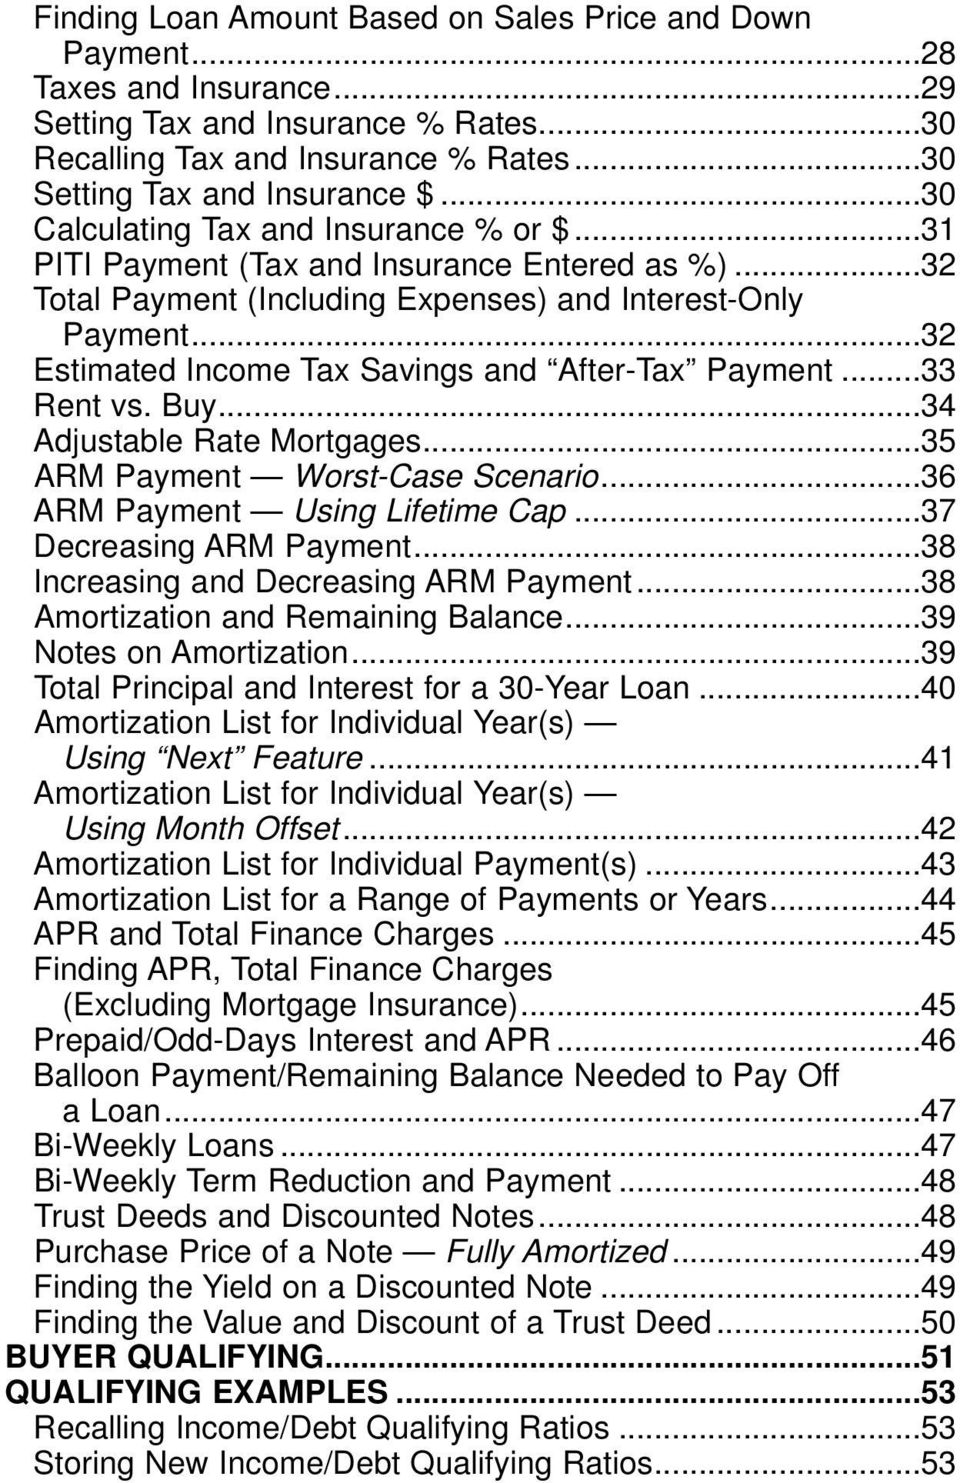 ..32 Estimated Income Tax Savings and After-Tax Payment...33 Rent vs. Buy...34 Adjustable Rate Mortgages...35 ARM Payment Worst-Case Scenario...36 ARM Payment Using Lifetime Cap.